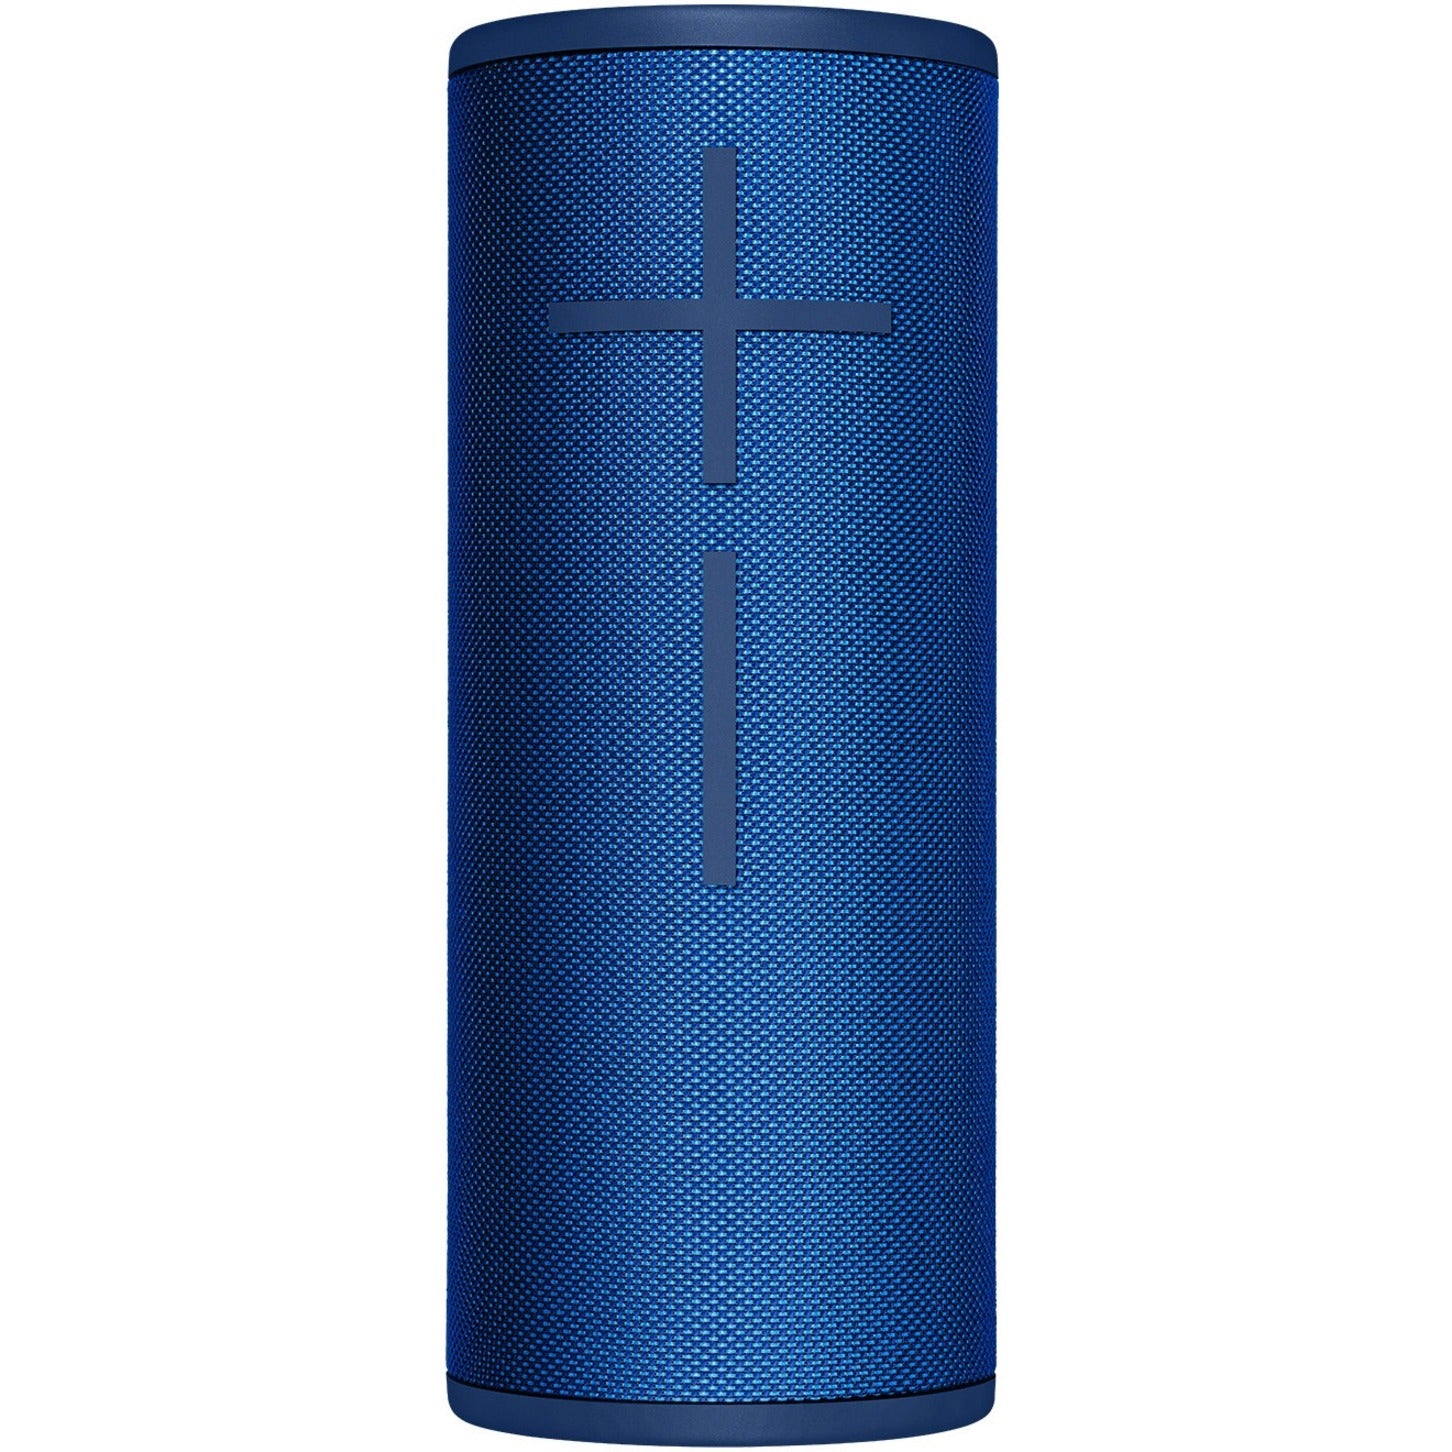 Ultimate Ears 984-001350 BOOM 3 Speaker System, Lagoon Blue. Portable Wireless Speaker with 360° Sound, Deep Bass, and Durability